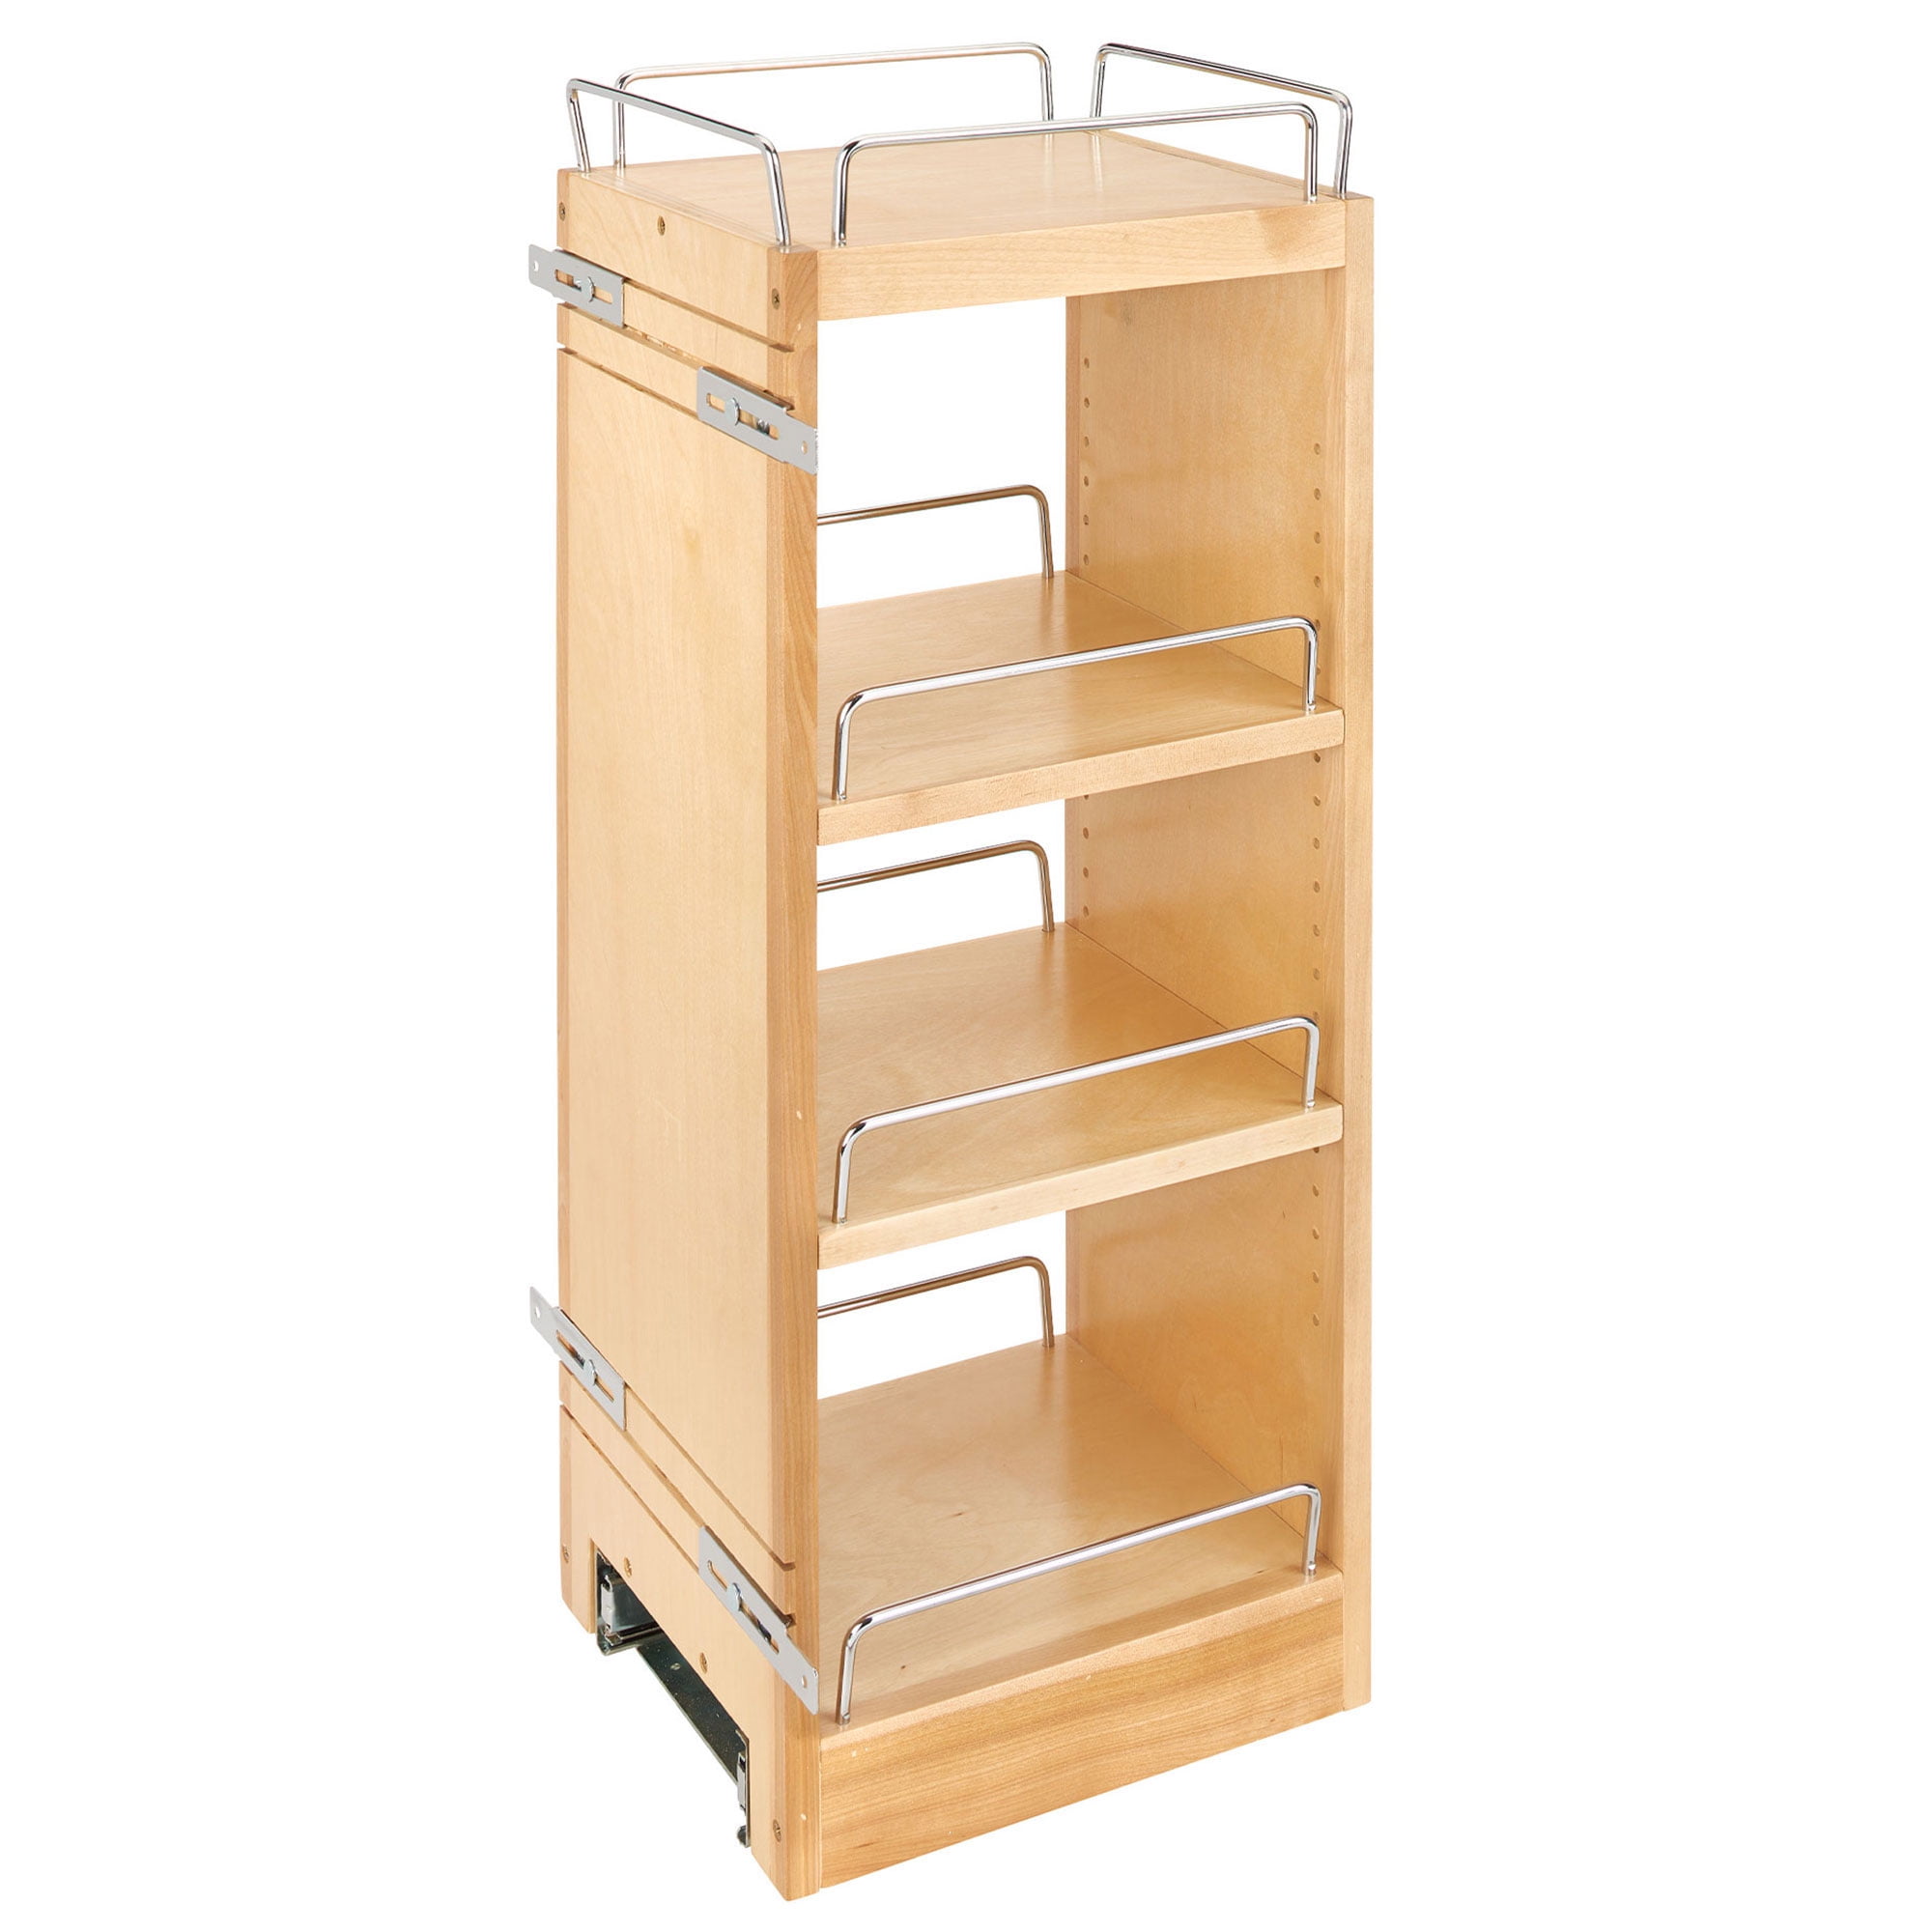  Rev-A-Shelf Pull Out Base Cabinet Organizer with Soft